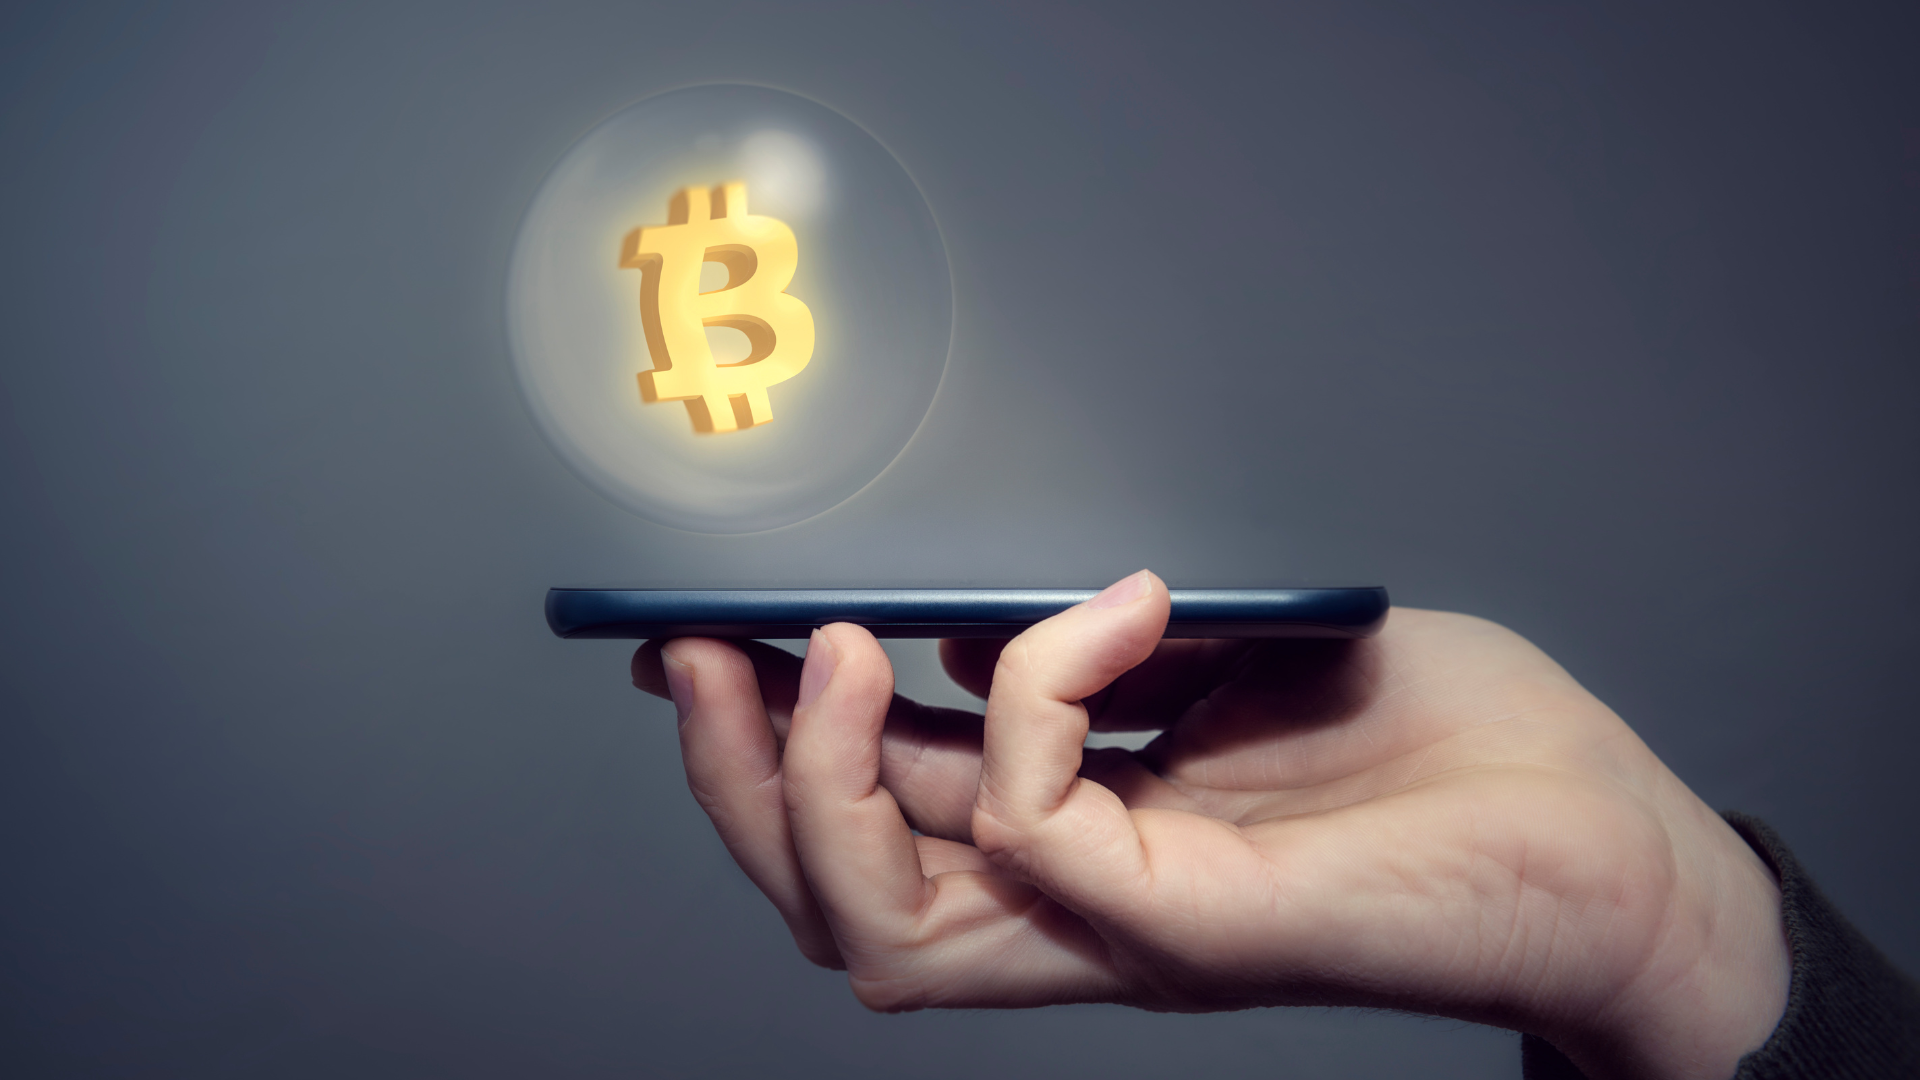 How to attract customers who want to pay with Bitcoin